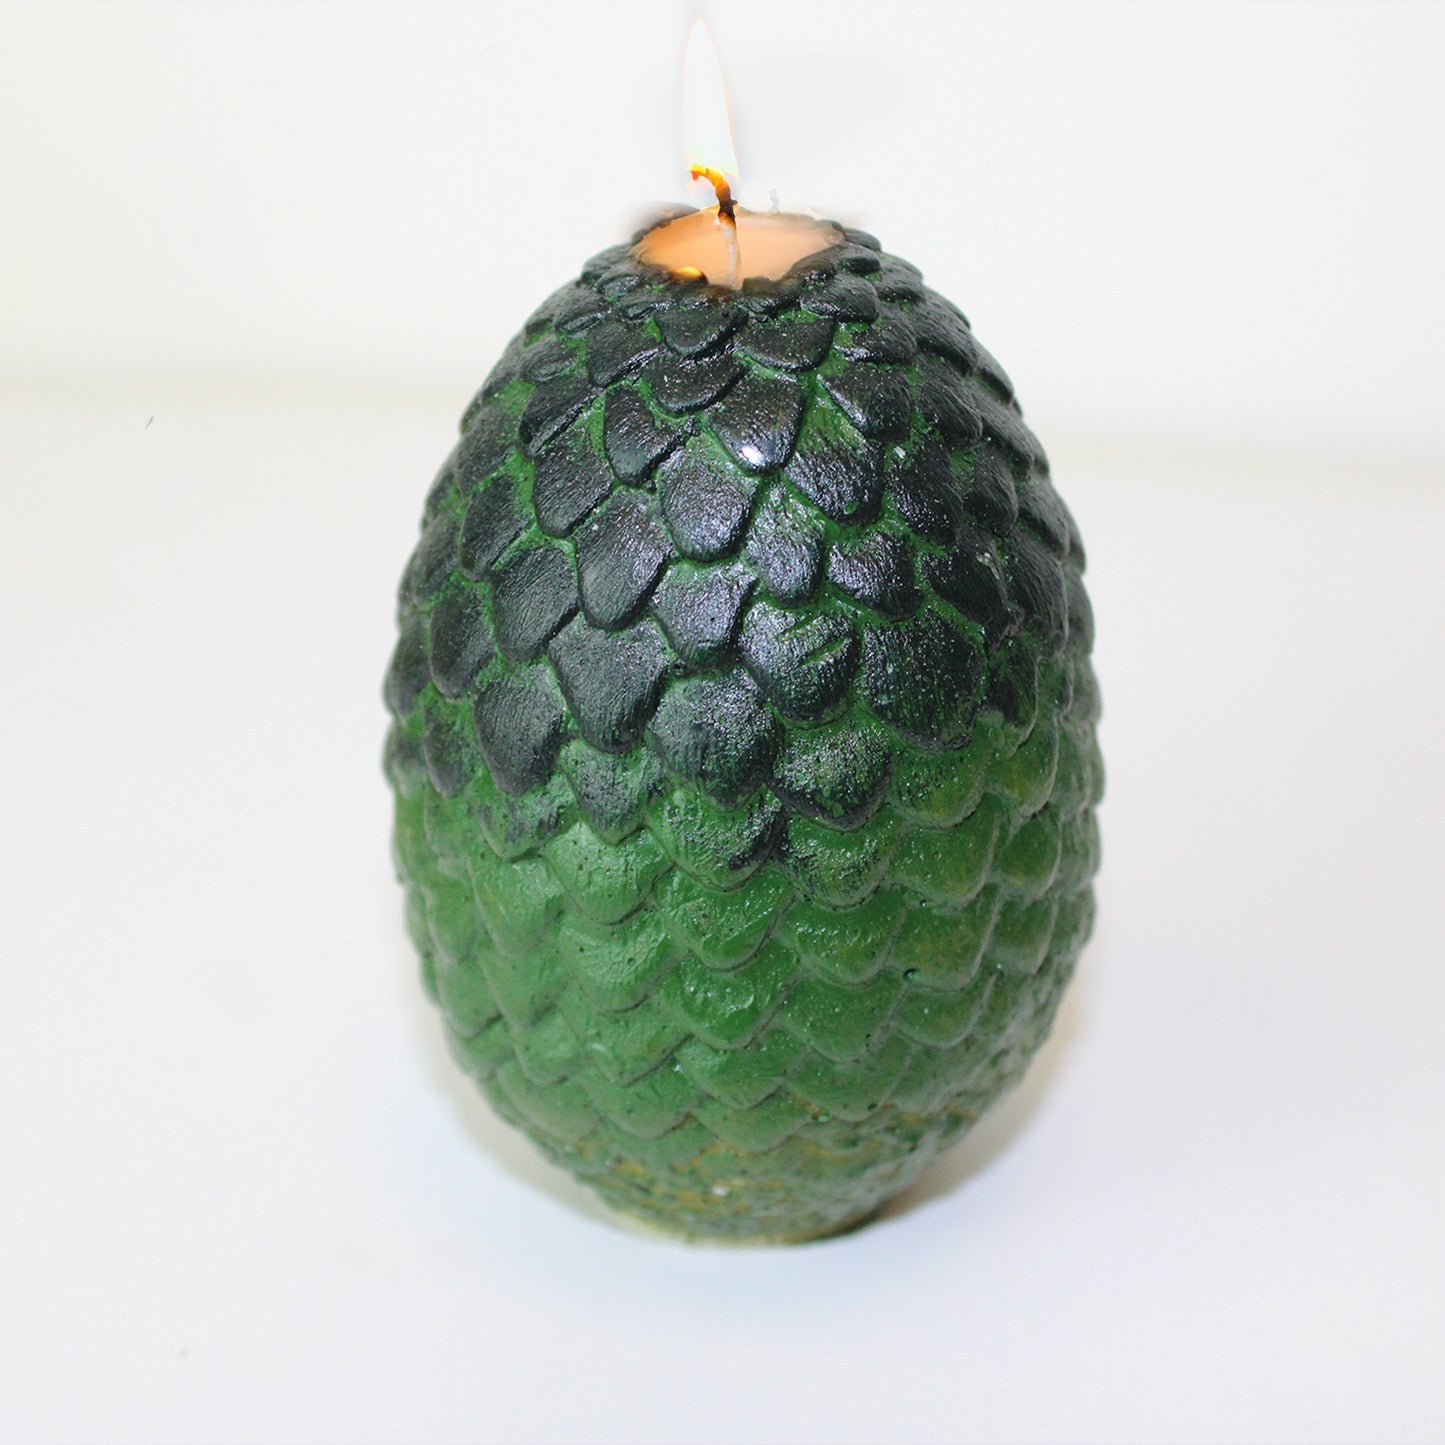 Game of Thrones Sculpted Dragon Egg Candle